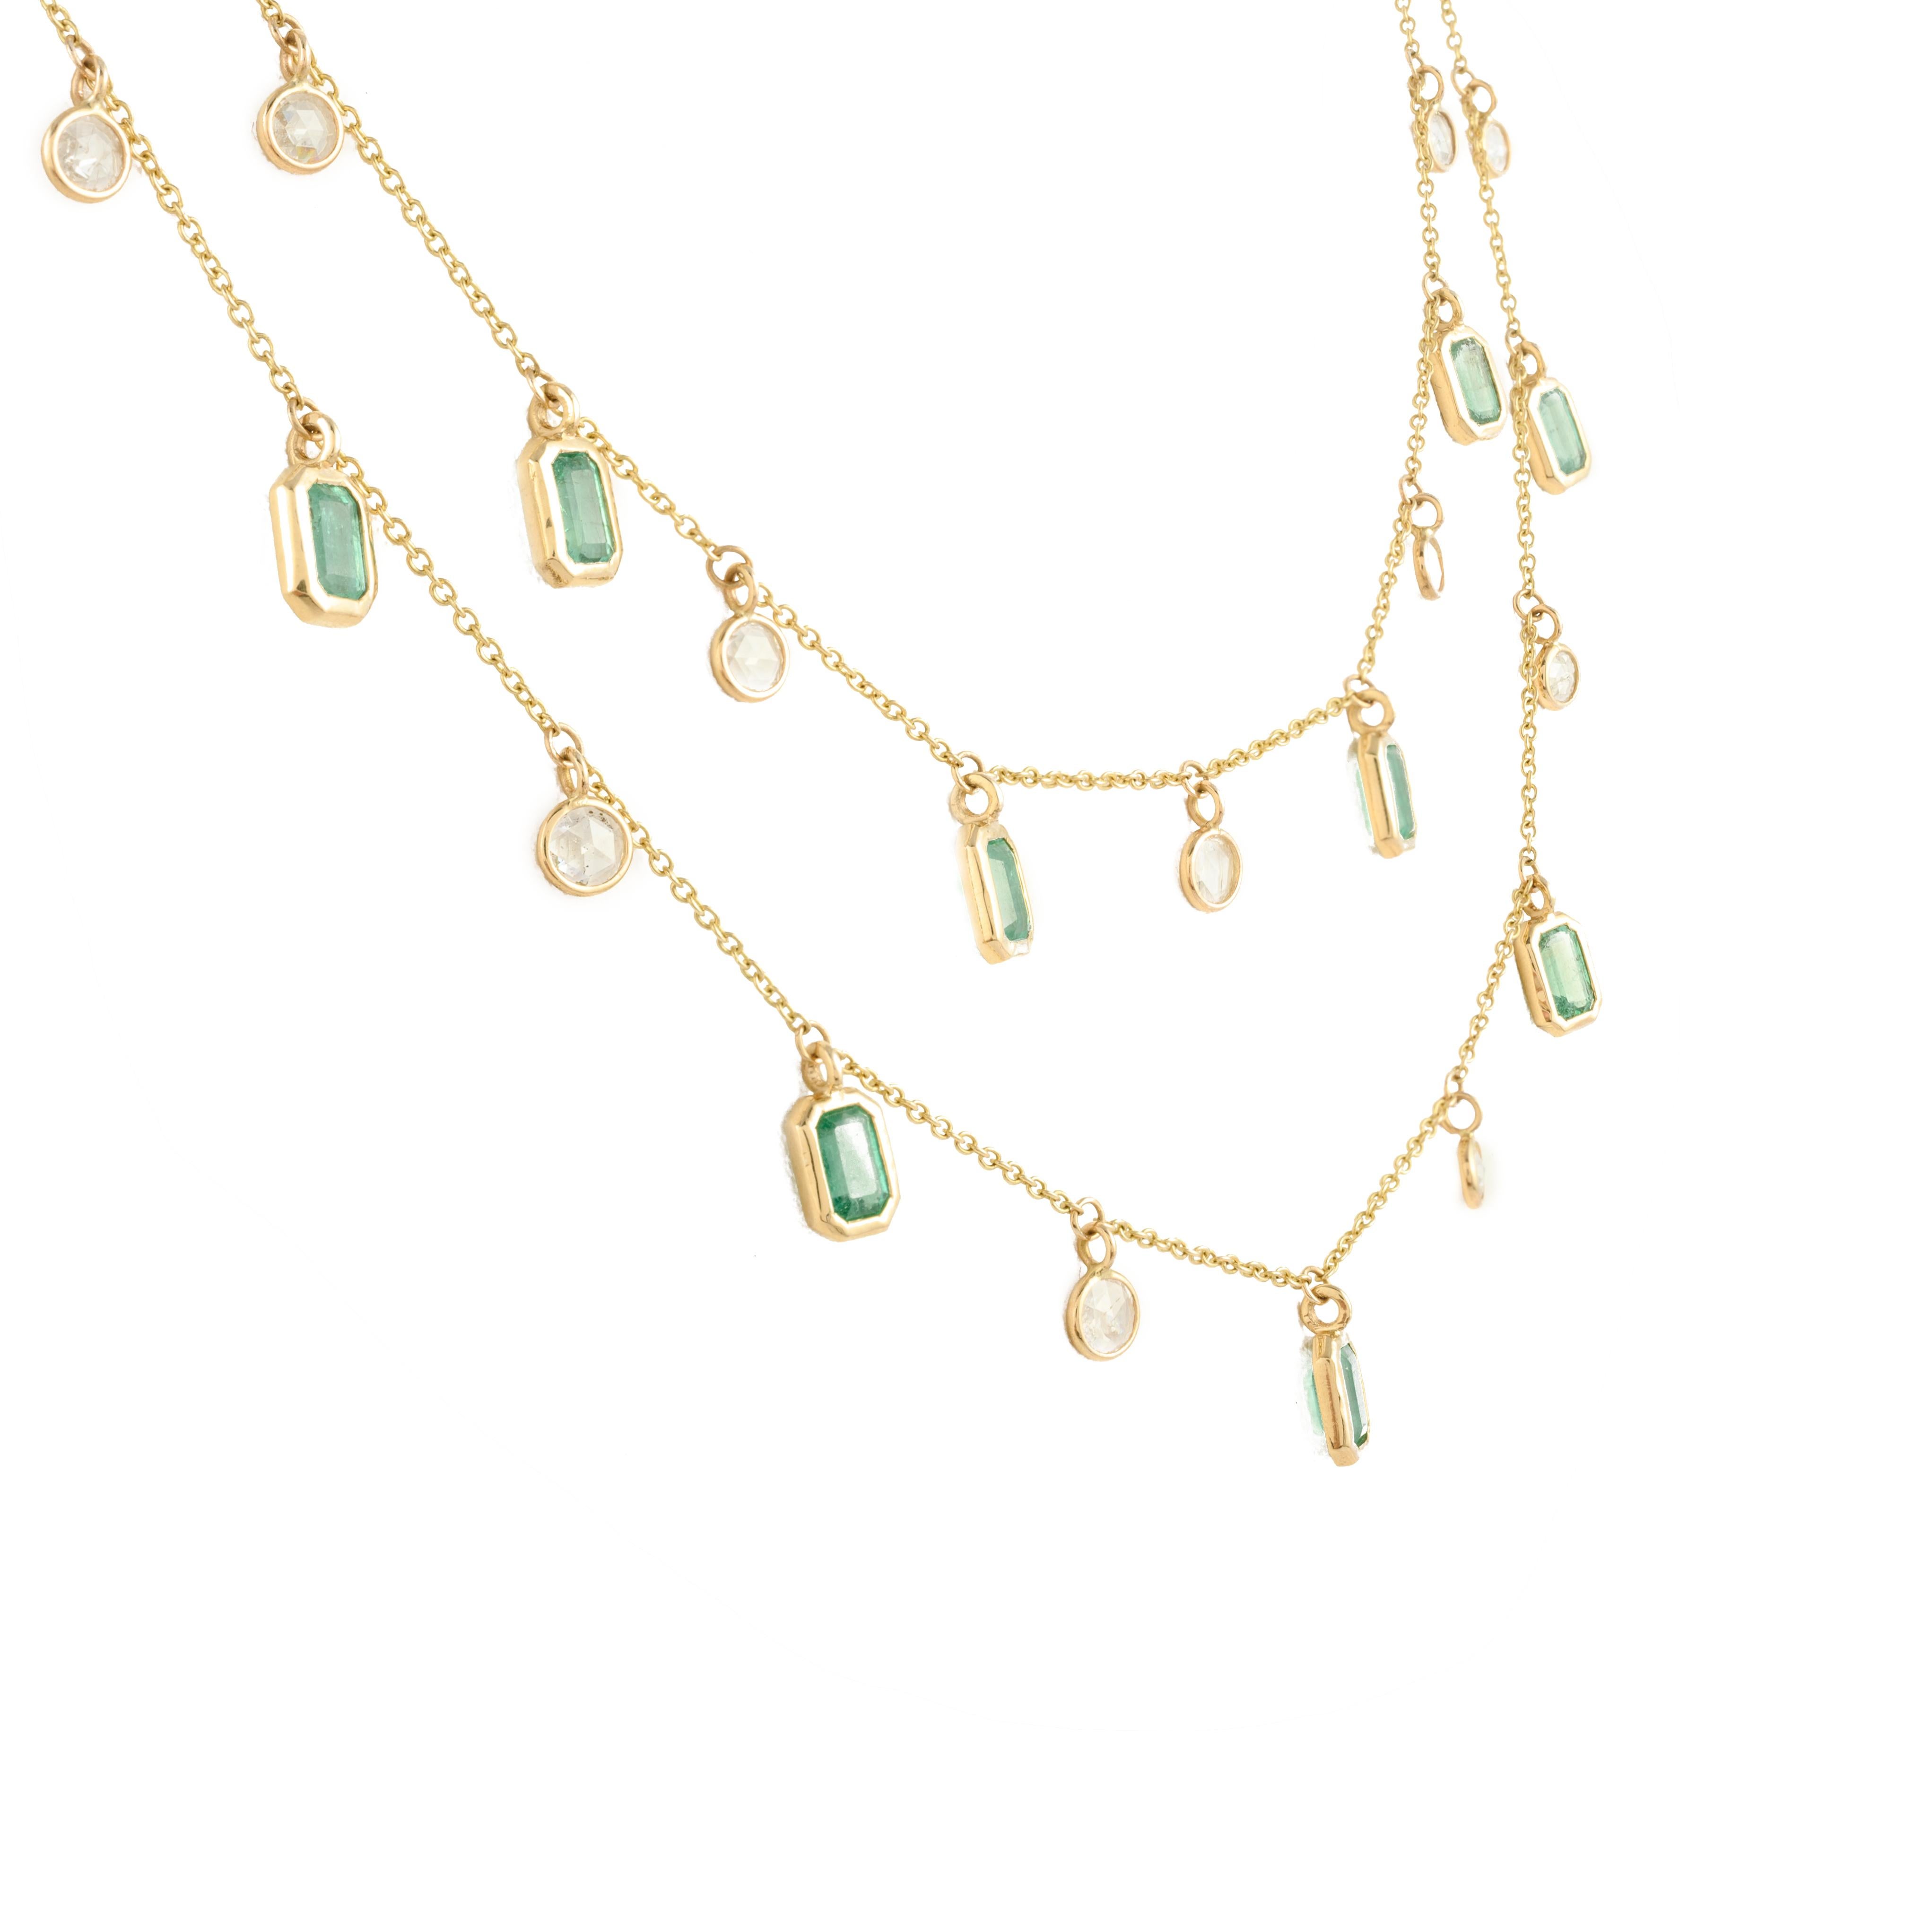 Natural Diamond Emerald Double Chain Necklace 18k Yellow Gold, Gift For Her In New Condition For Sale In Houston, TX